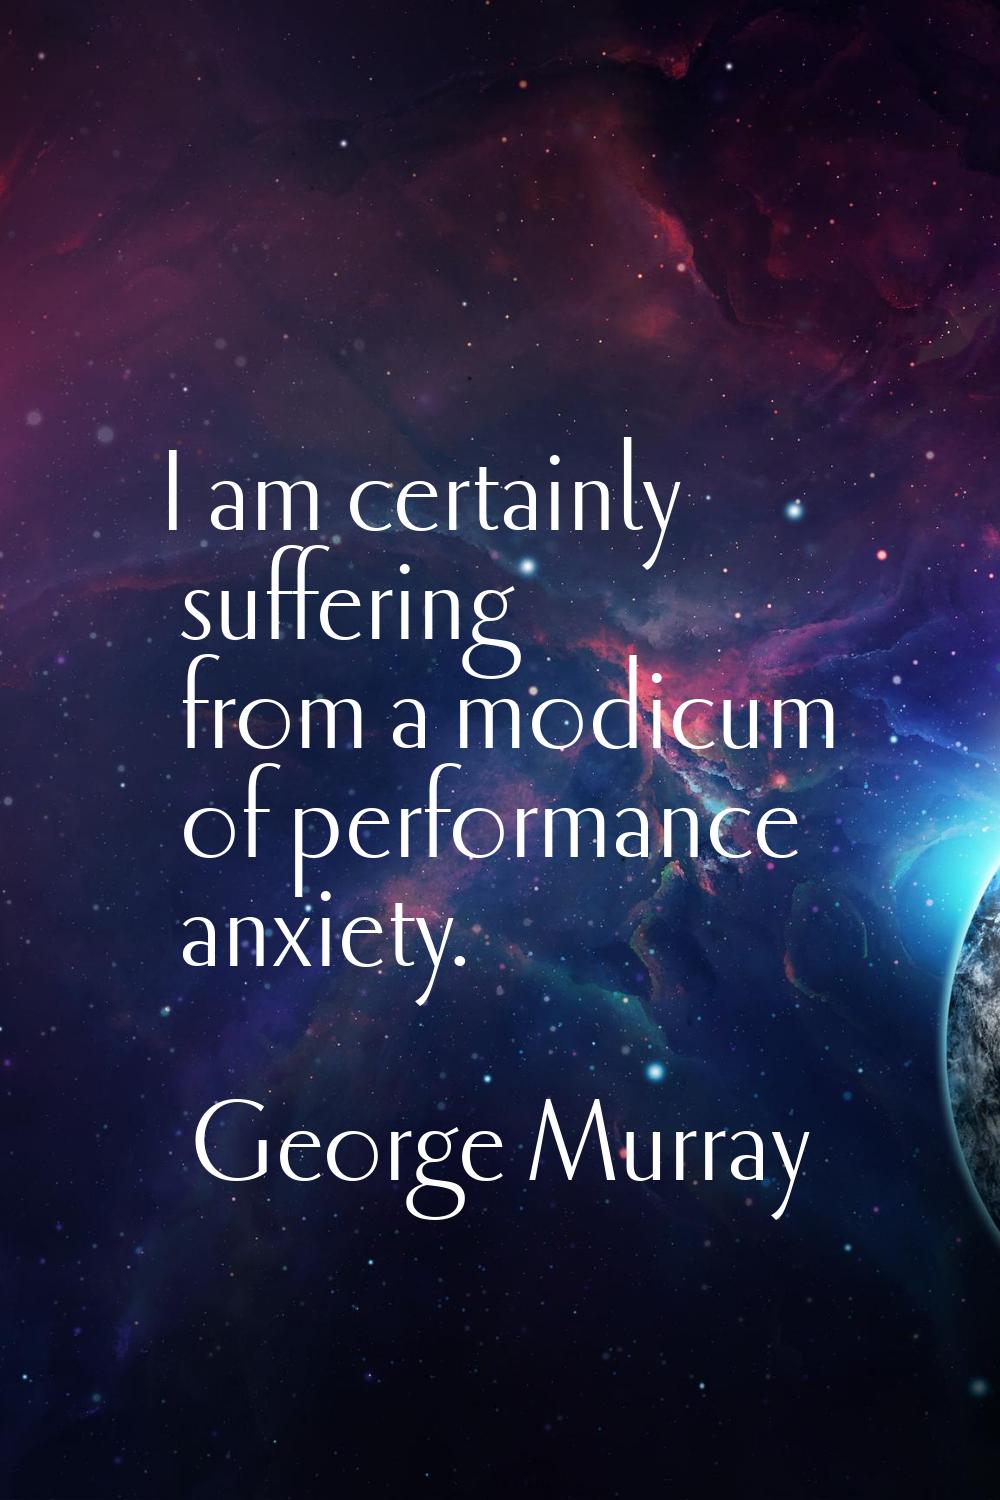 I am certainly suffering from a modicum of performance anxiety.